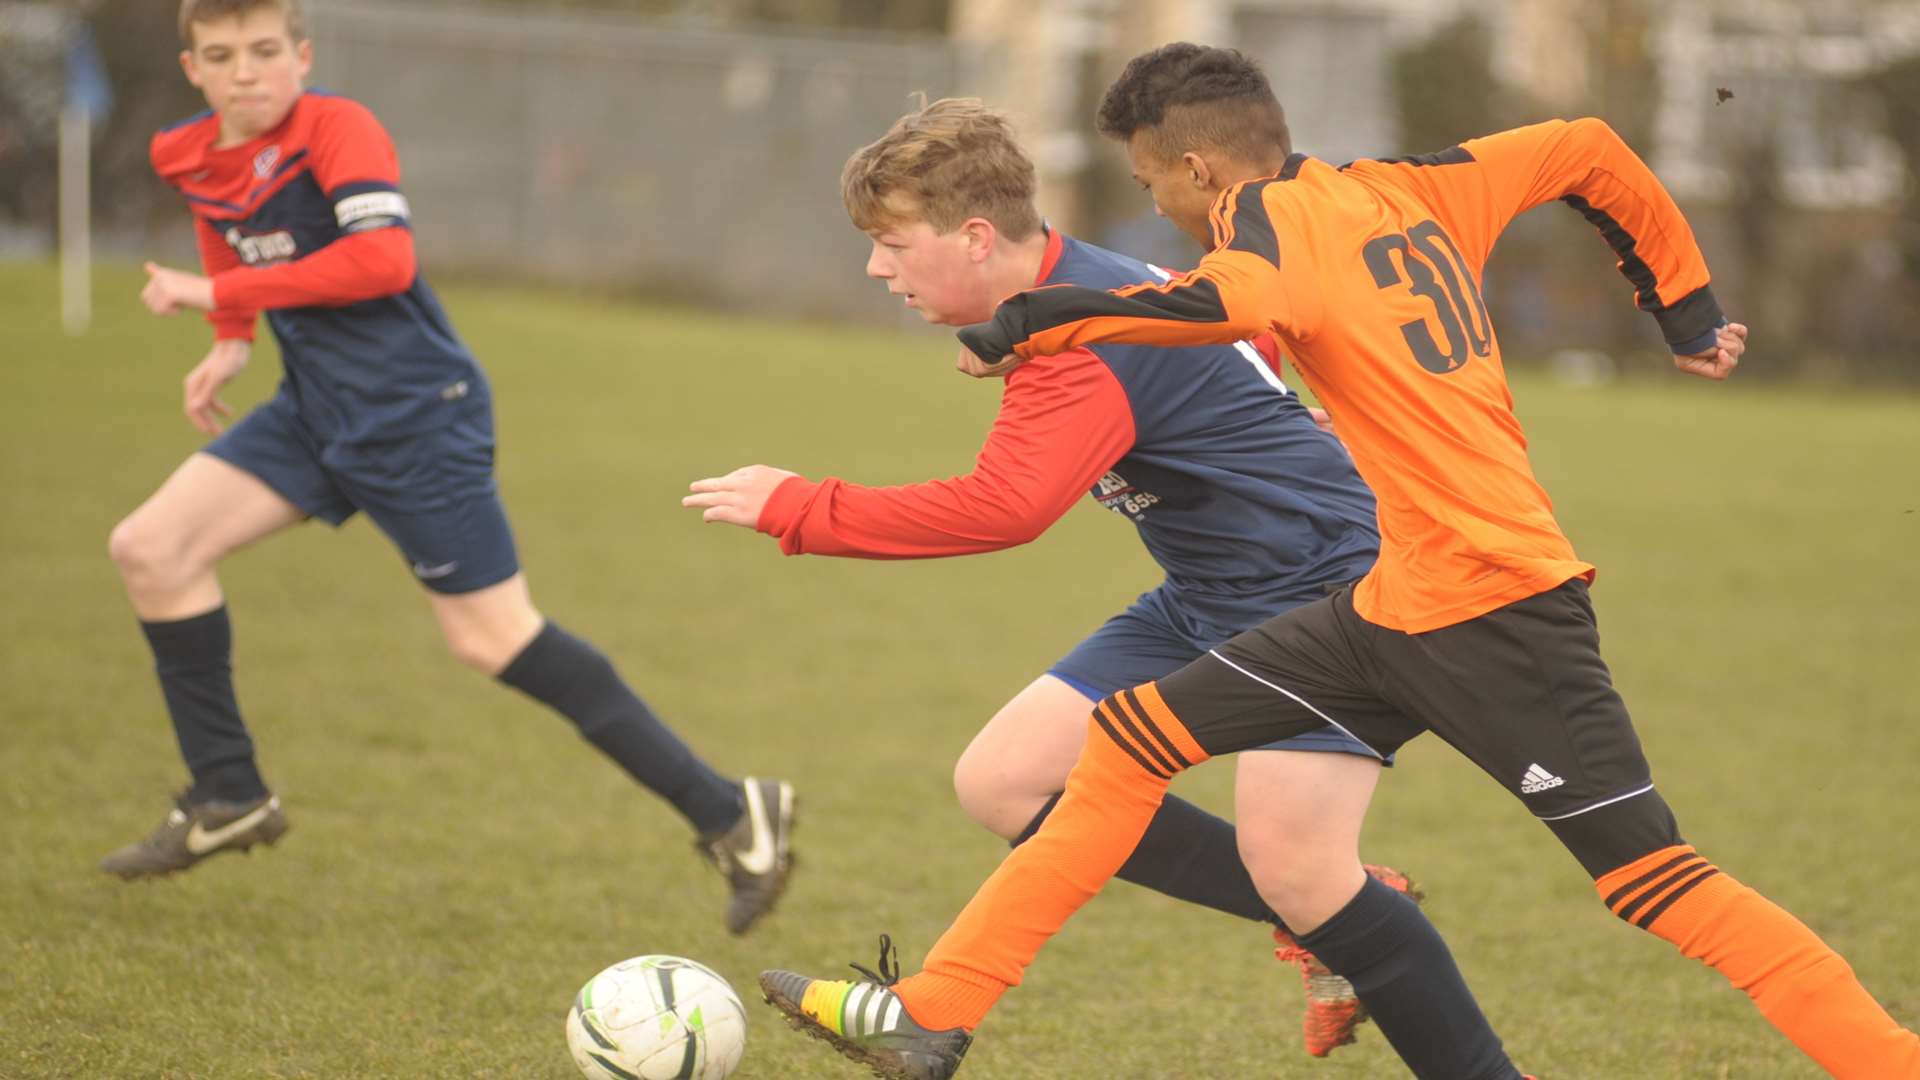 Hempstead Valley under-14s chased by Lordswood Youth in Division 1 Picture: Steve Crispe